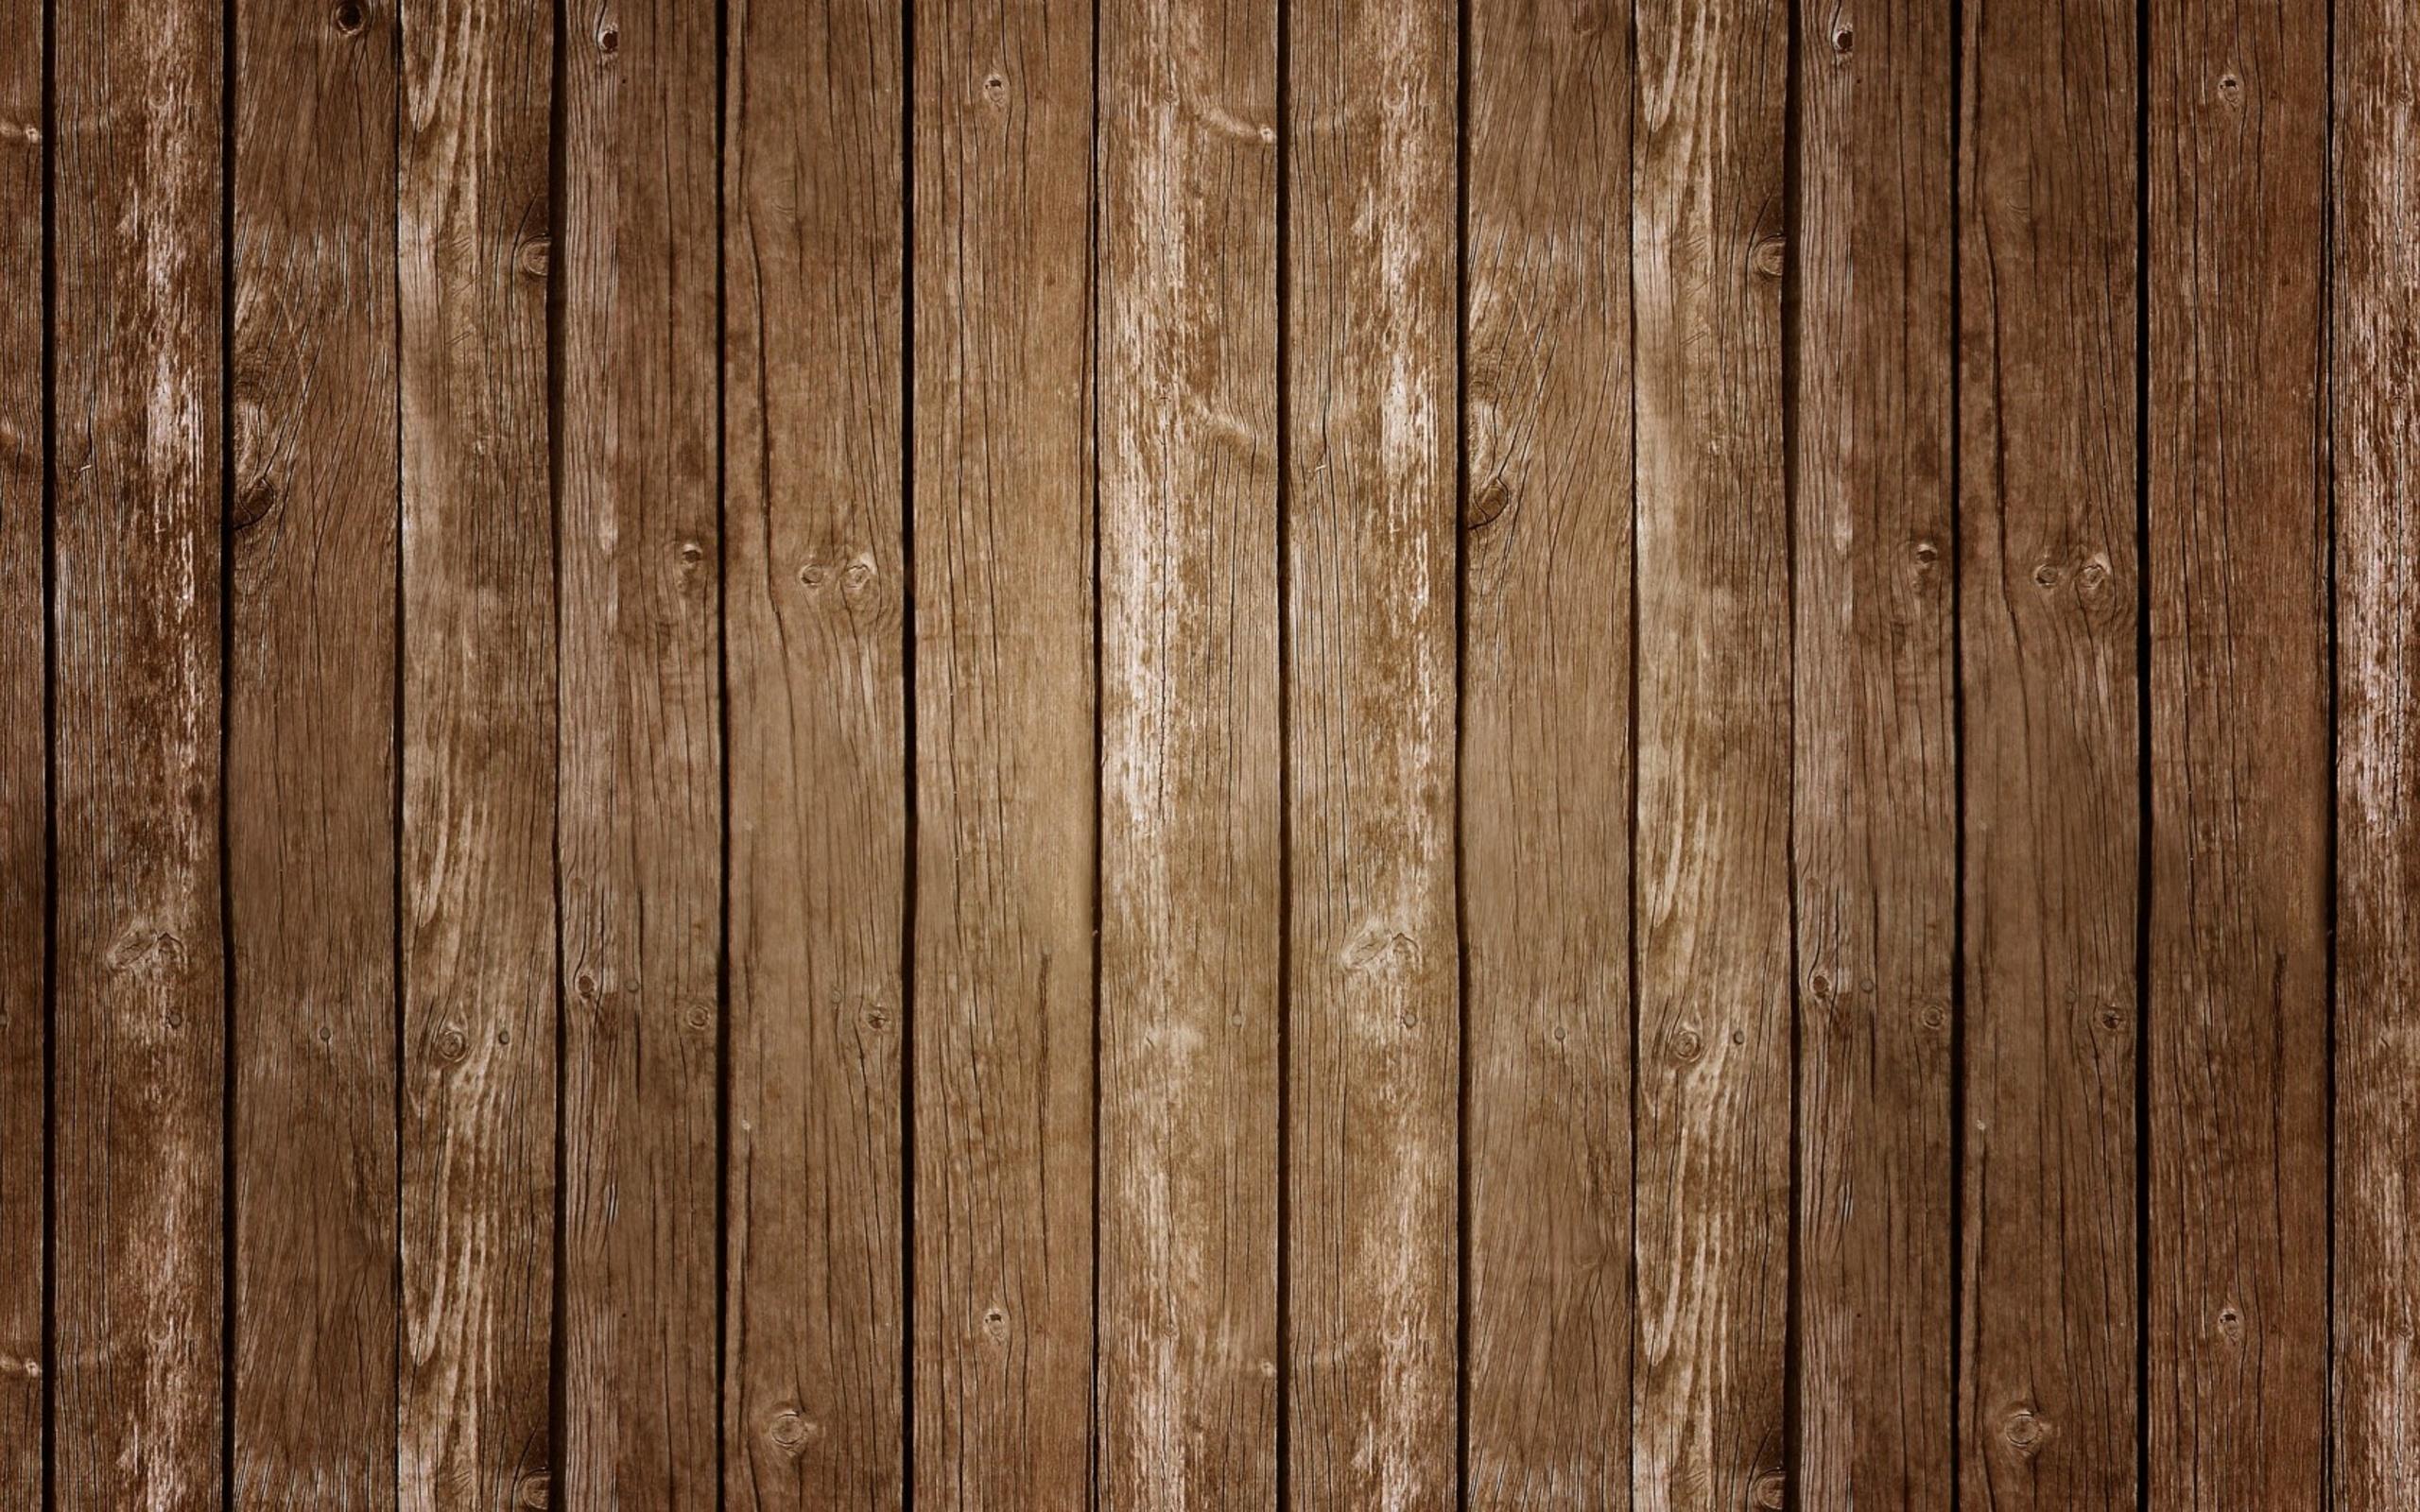 2560 x 1600 · jpeg - Android Wallpaper: Knock on Wood